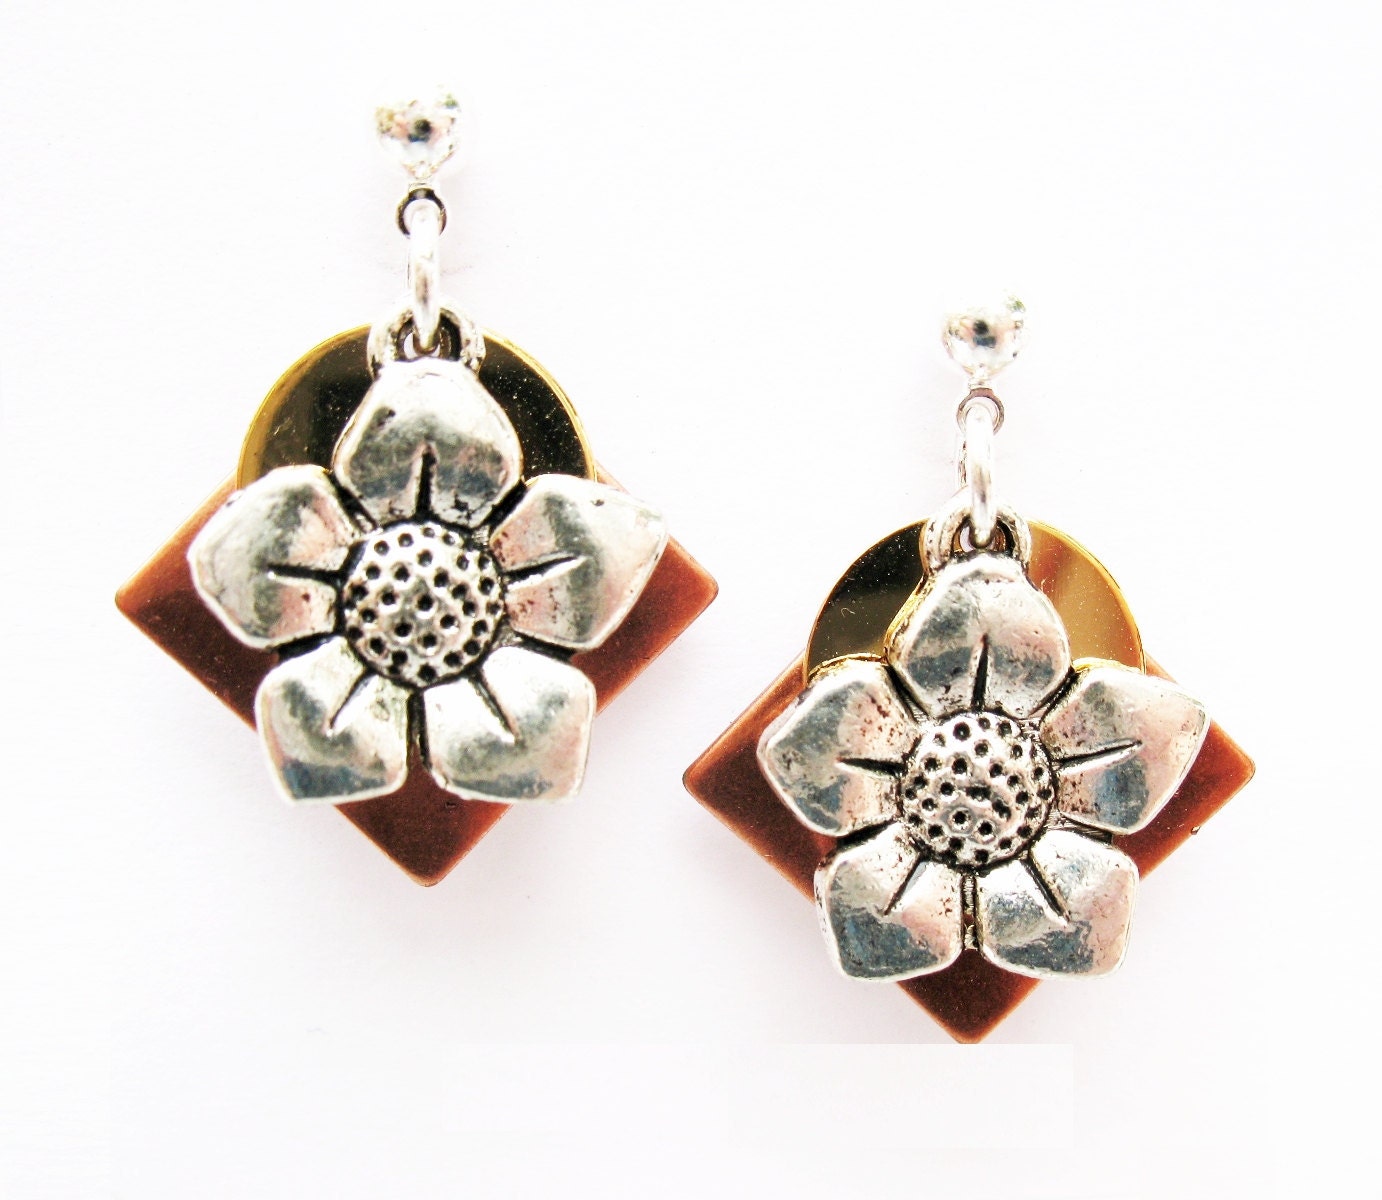 Magnolia Flower Charm Sterling Silver